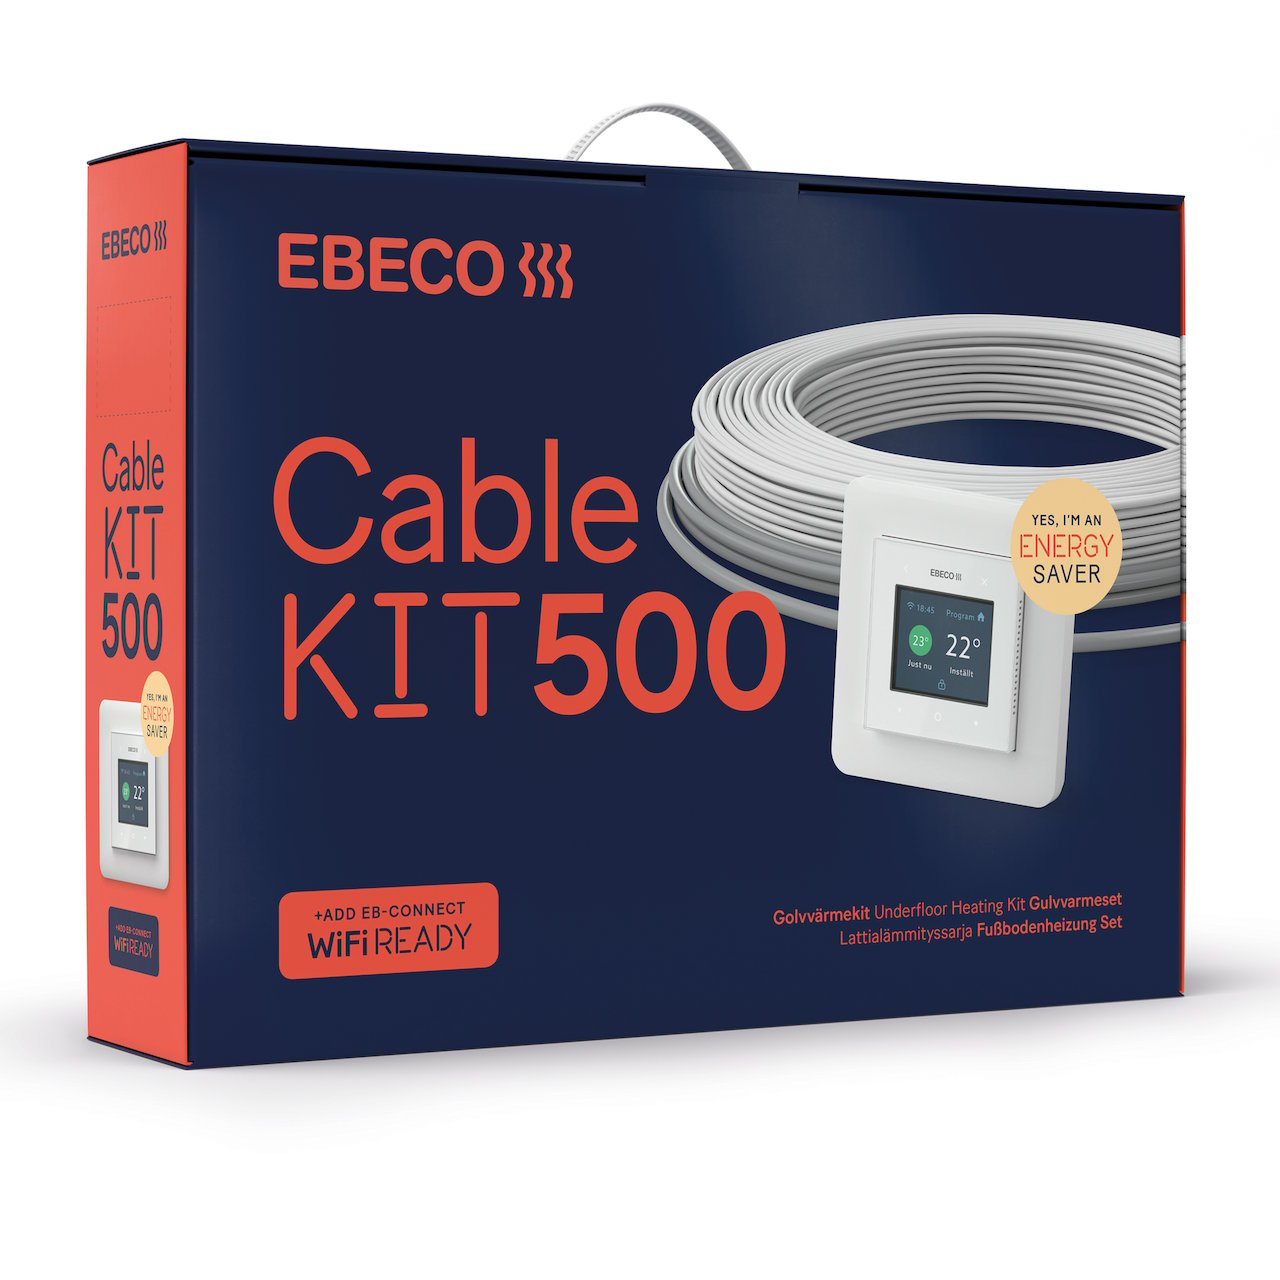 EBECO CABLE KIT 500 86M 960W